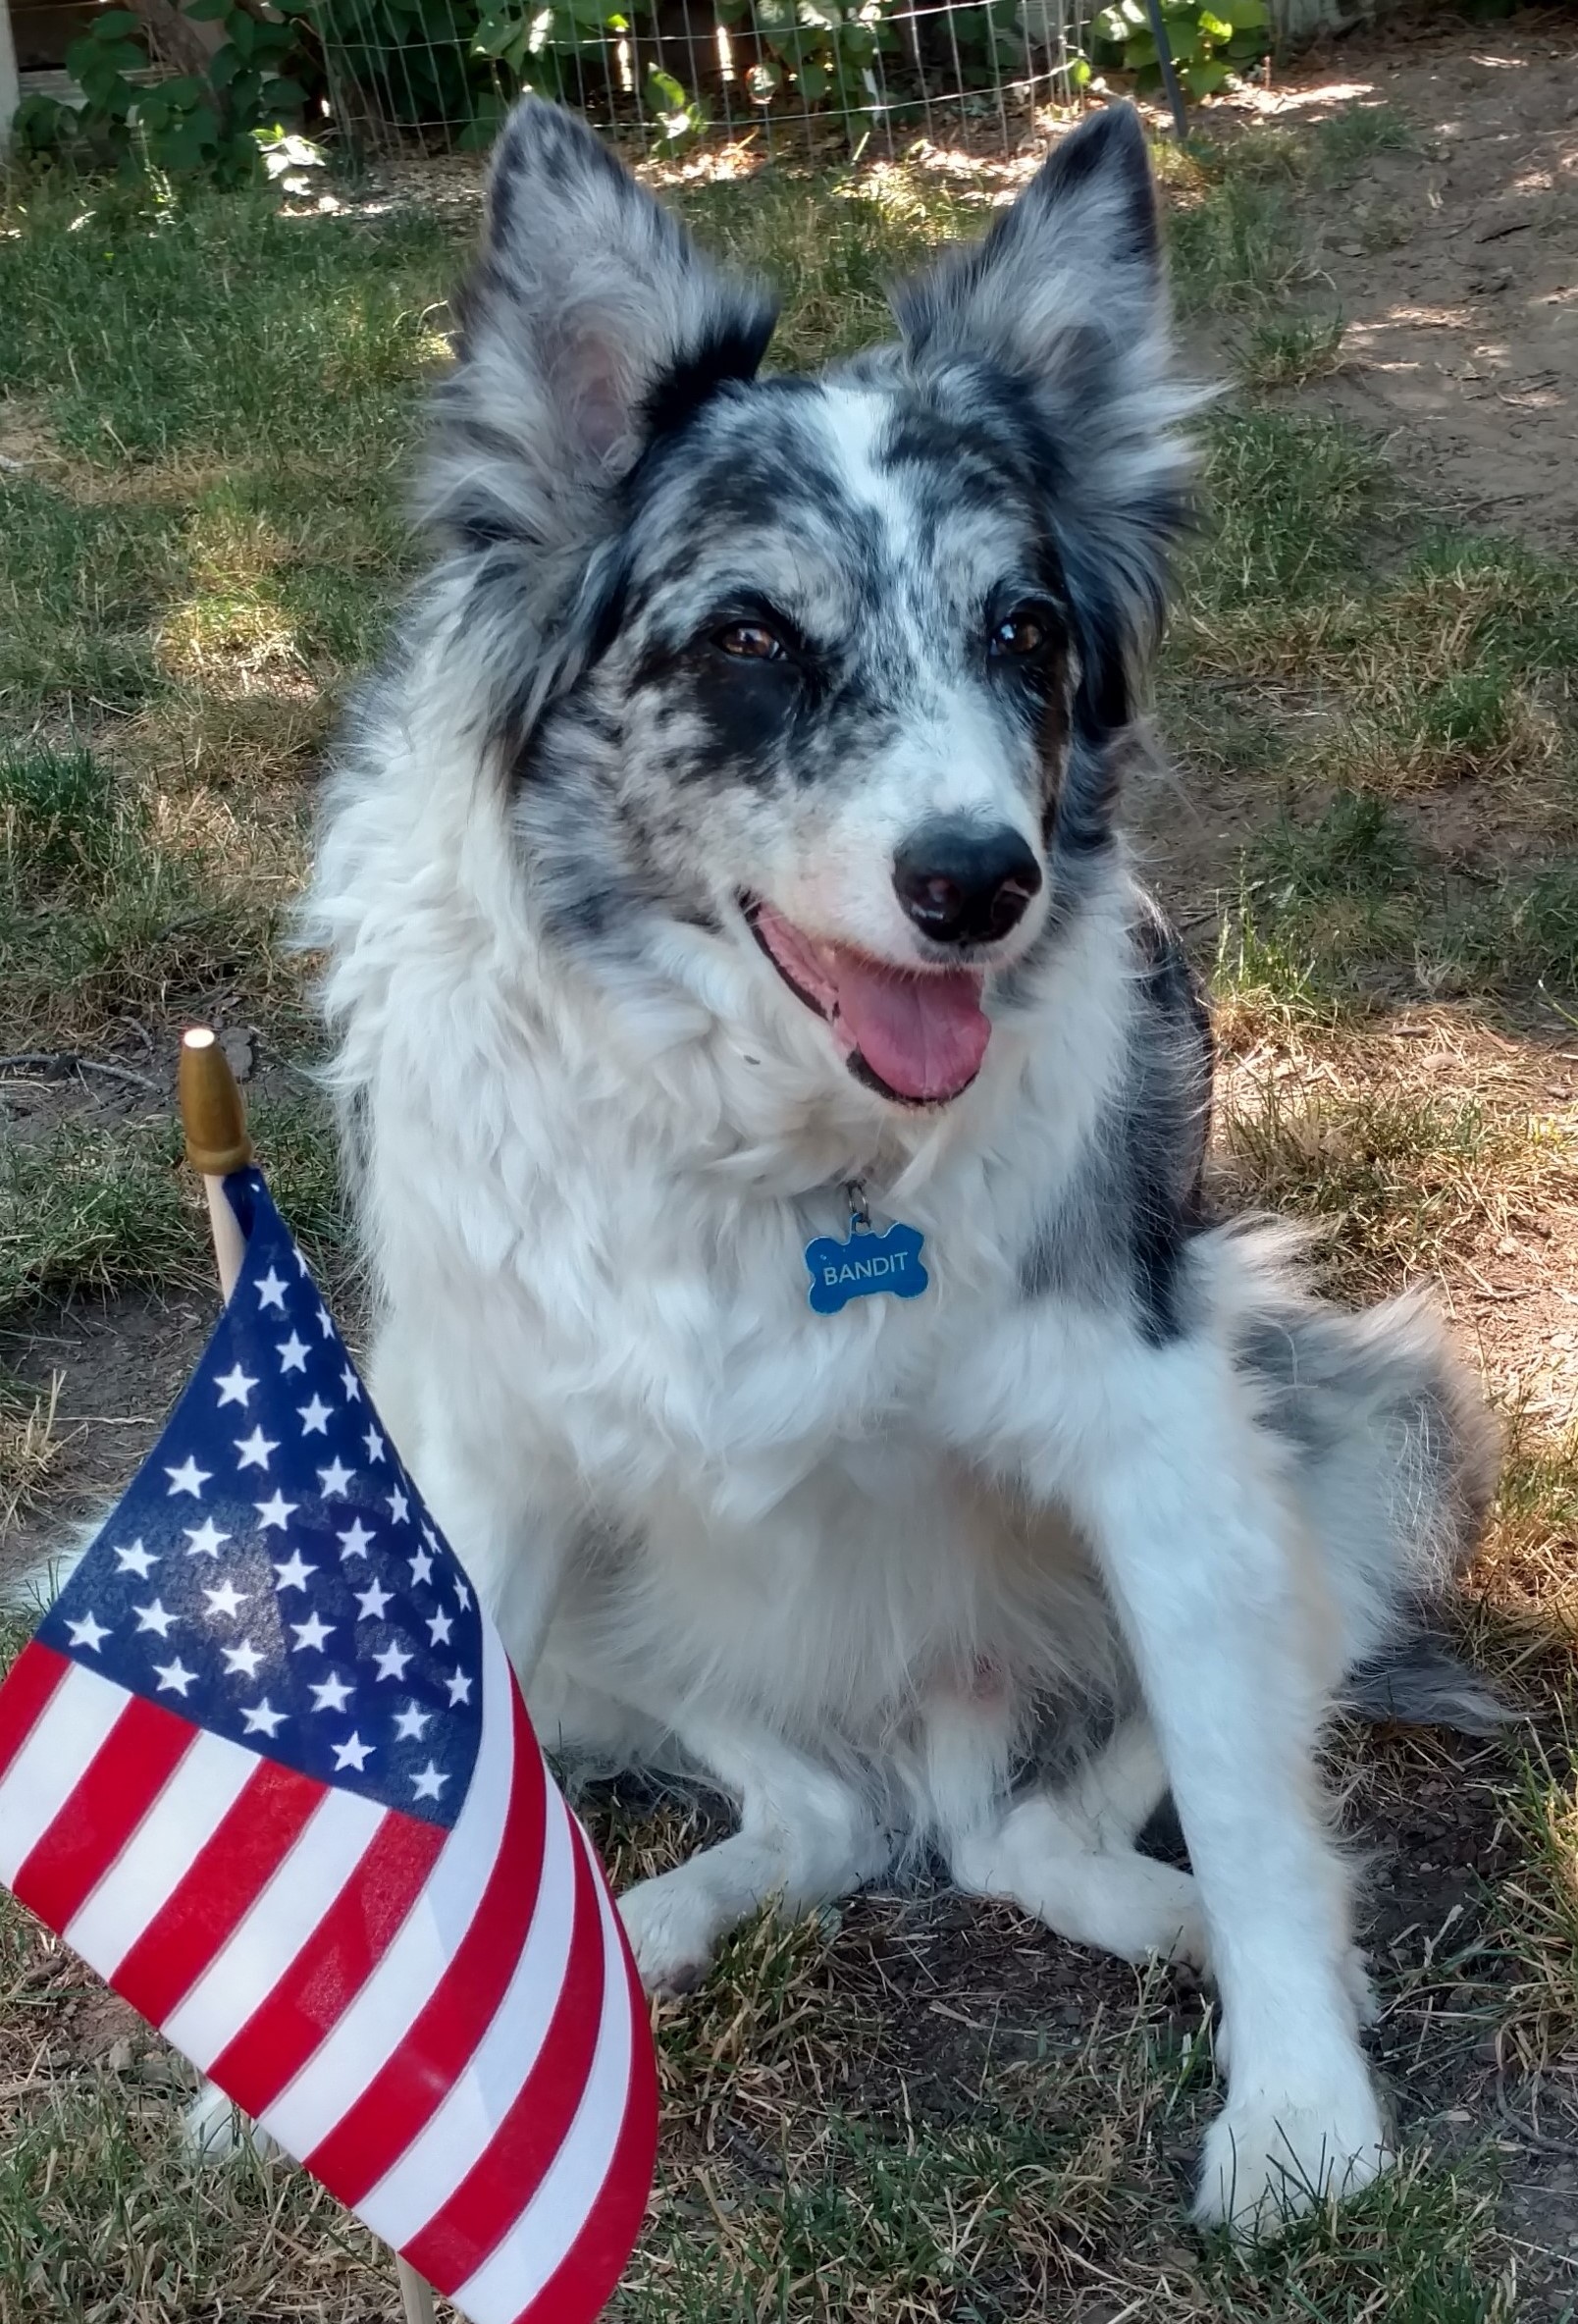 My dog Bandit, getting ready for the Fourth of July. (c) Joanne Brokaw 2016